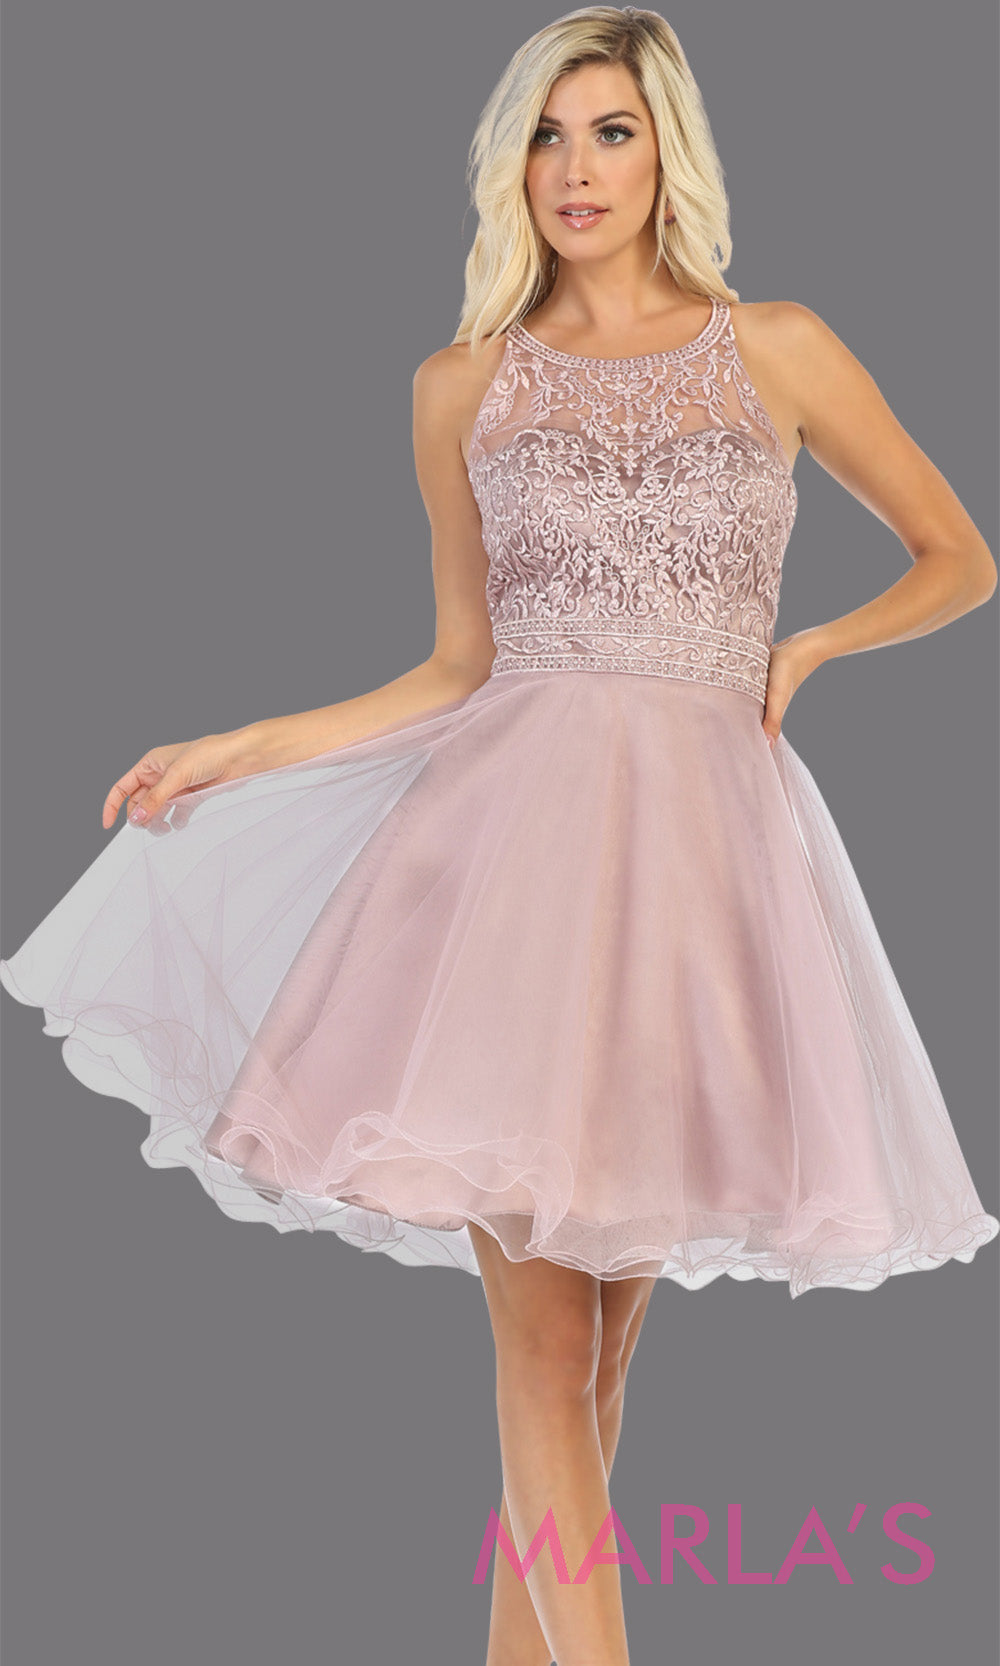 Short high neck mauve grade 8 graduation dress with puffy skirt from mayqueen. This dusty rose cross back dress is perfect for plus size grad, homecoming, Bat Mitzvah, quinceanera damas, middle school graduation, junior bridesmaids